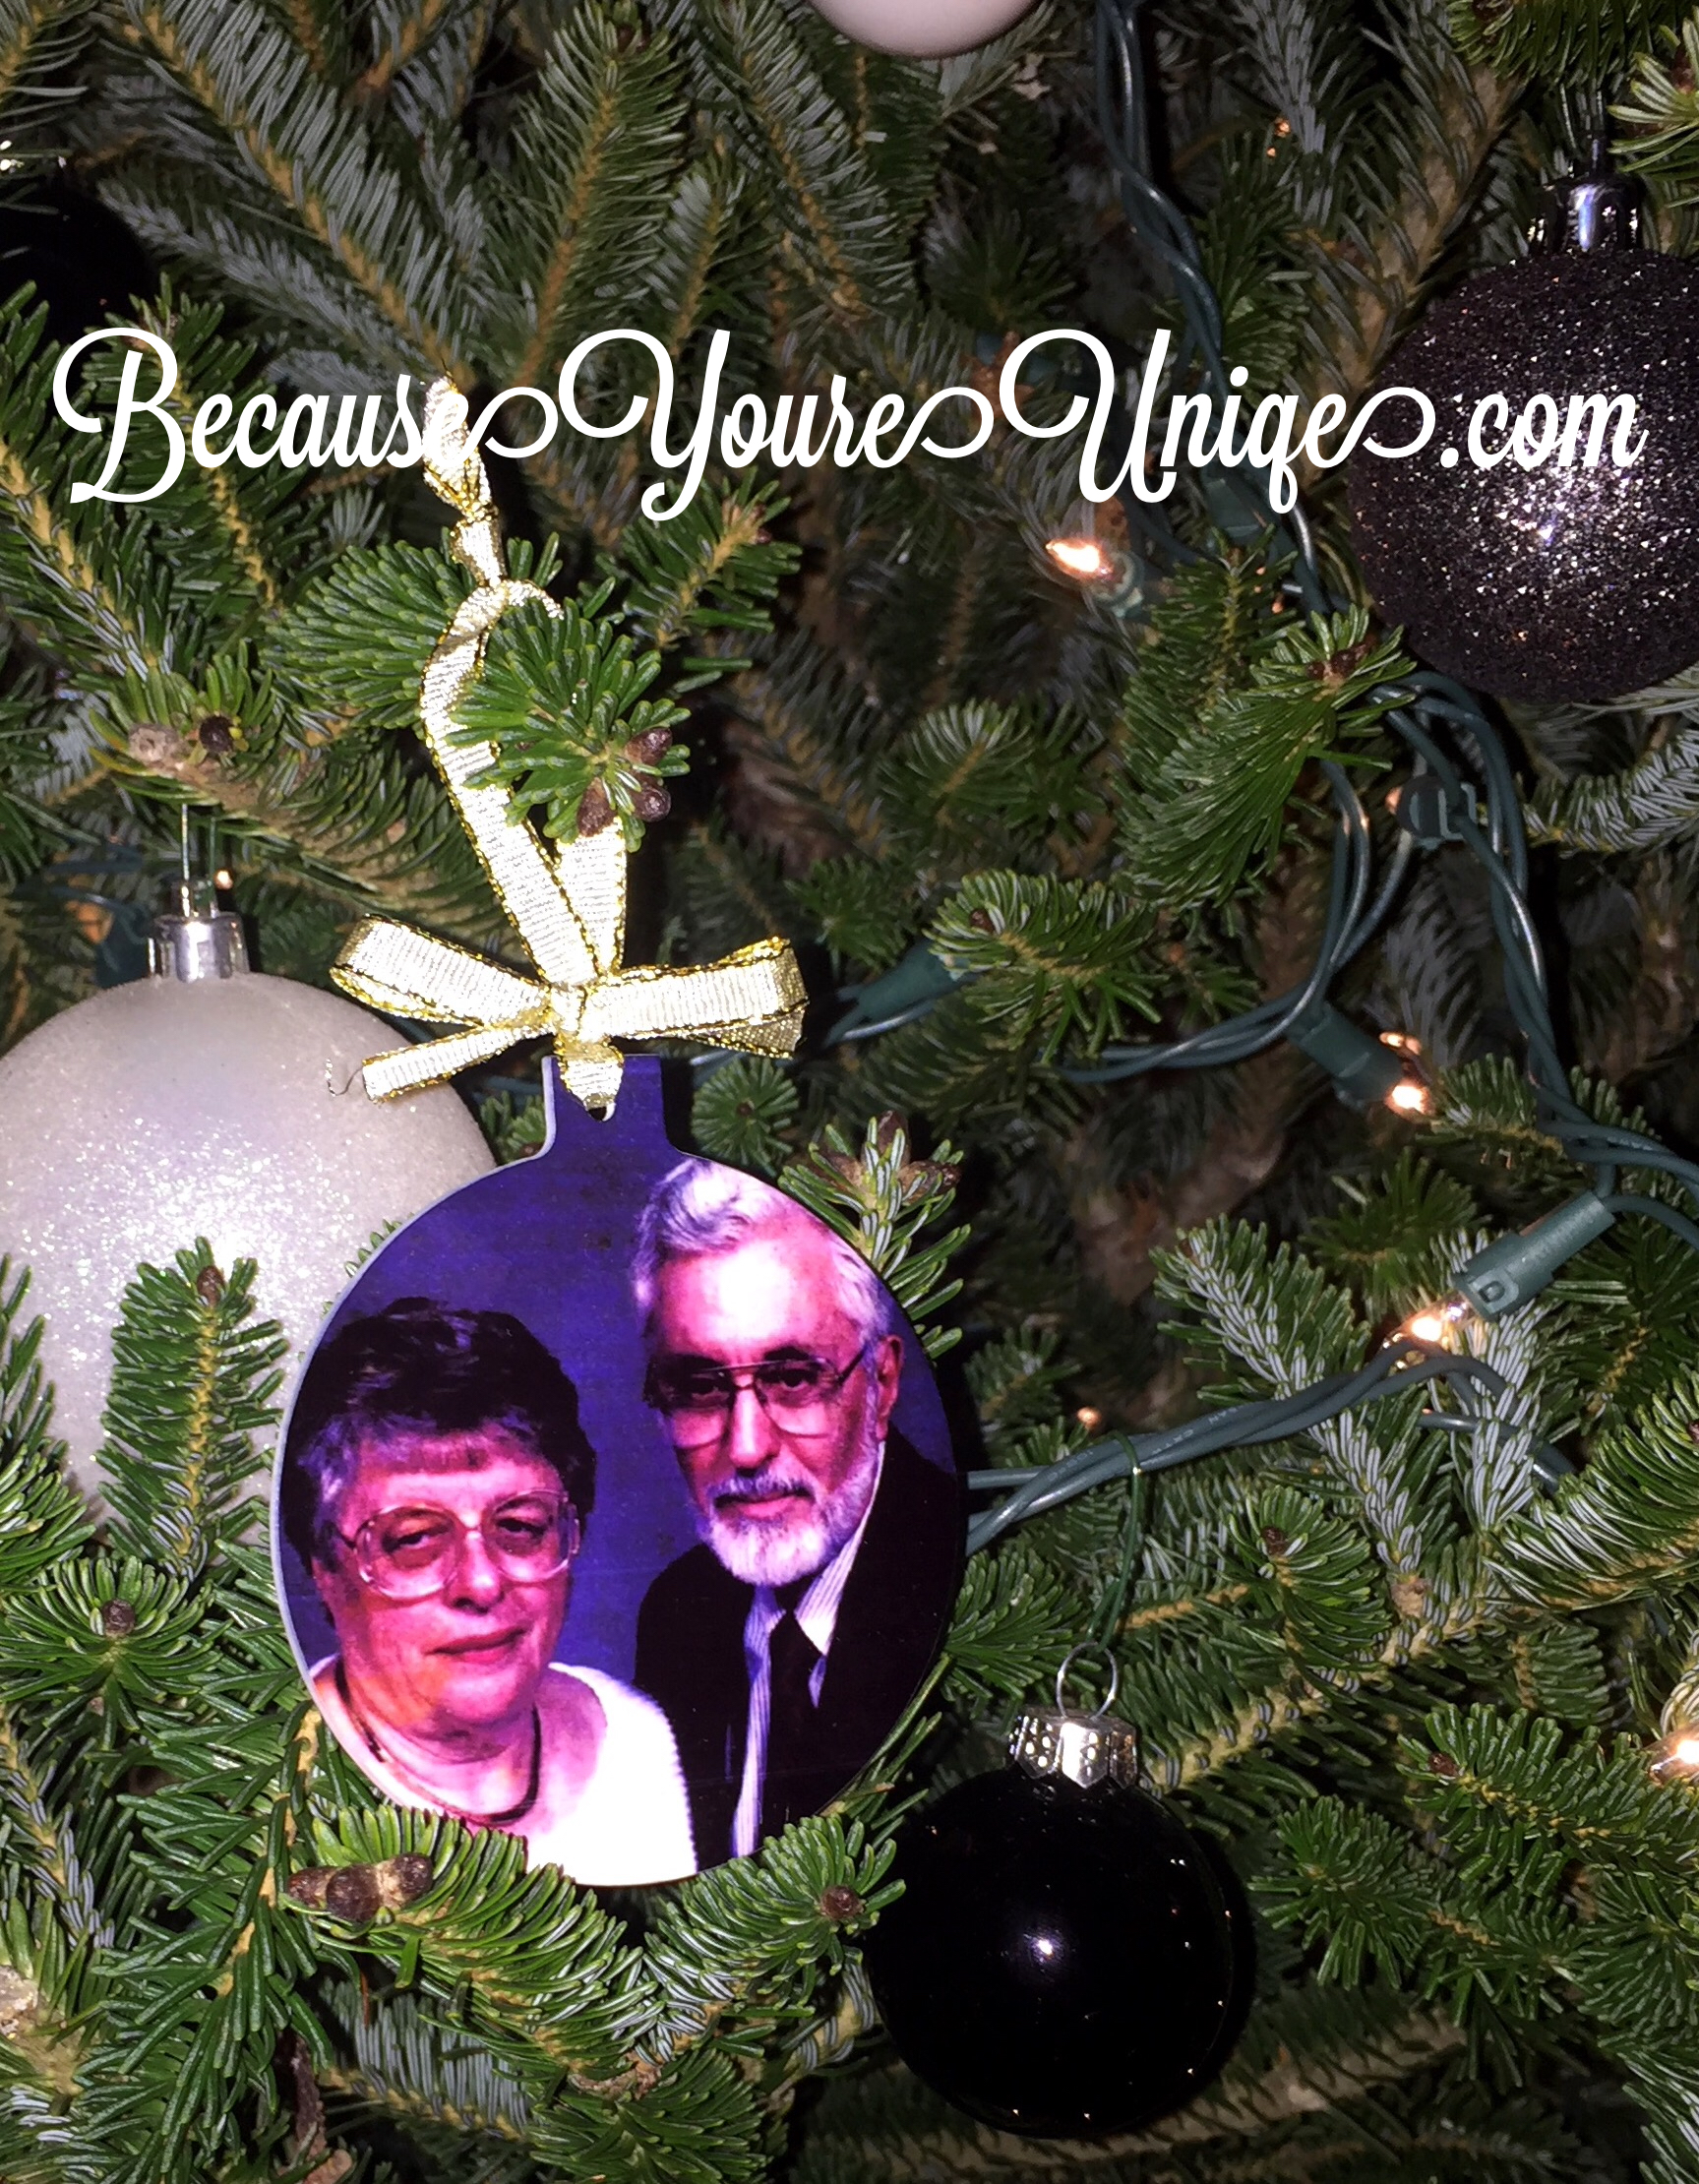 Memorial Ornament made with sublimation printing